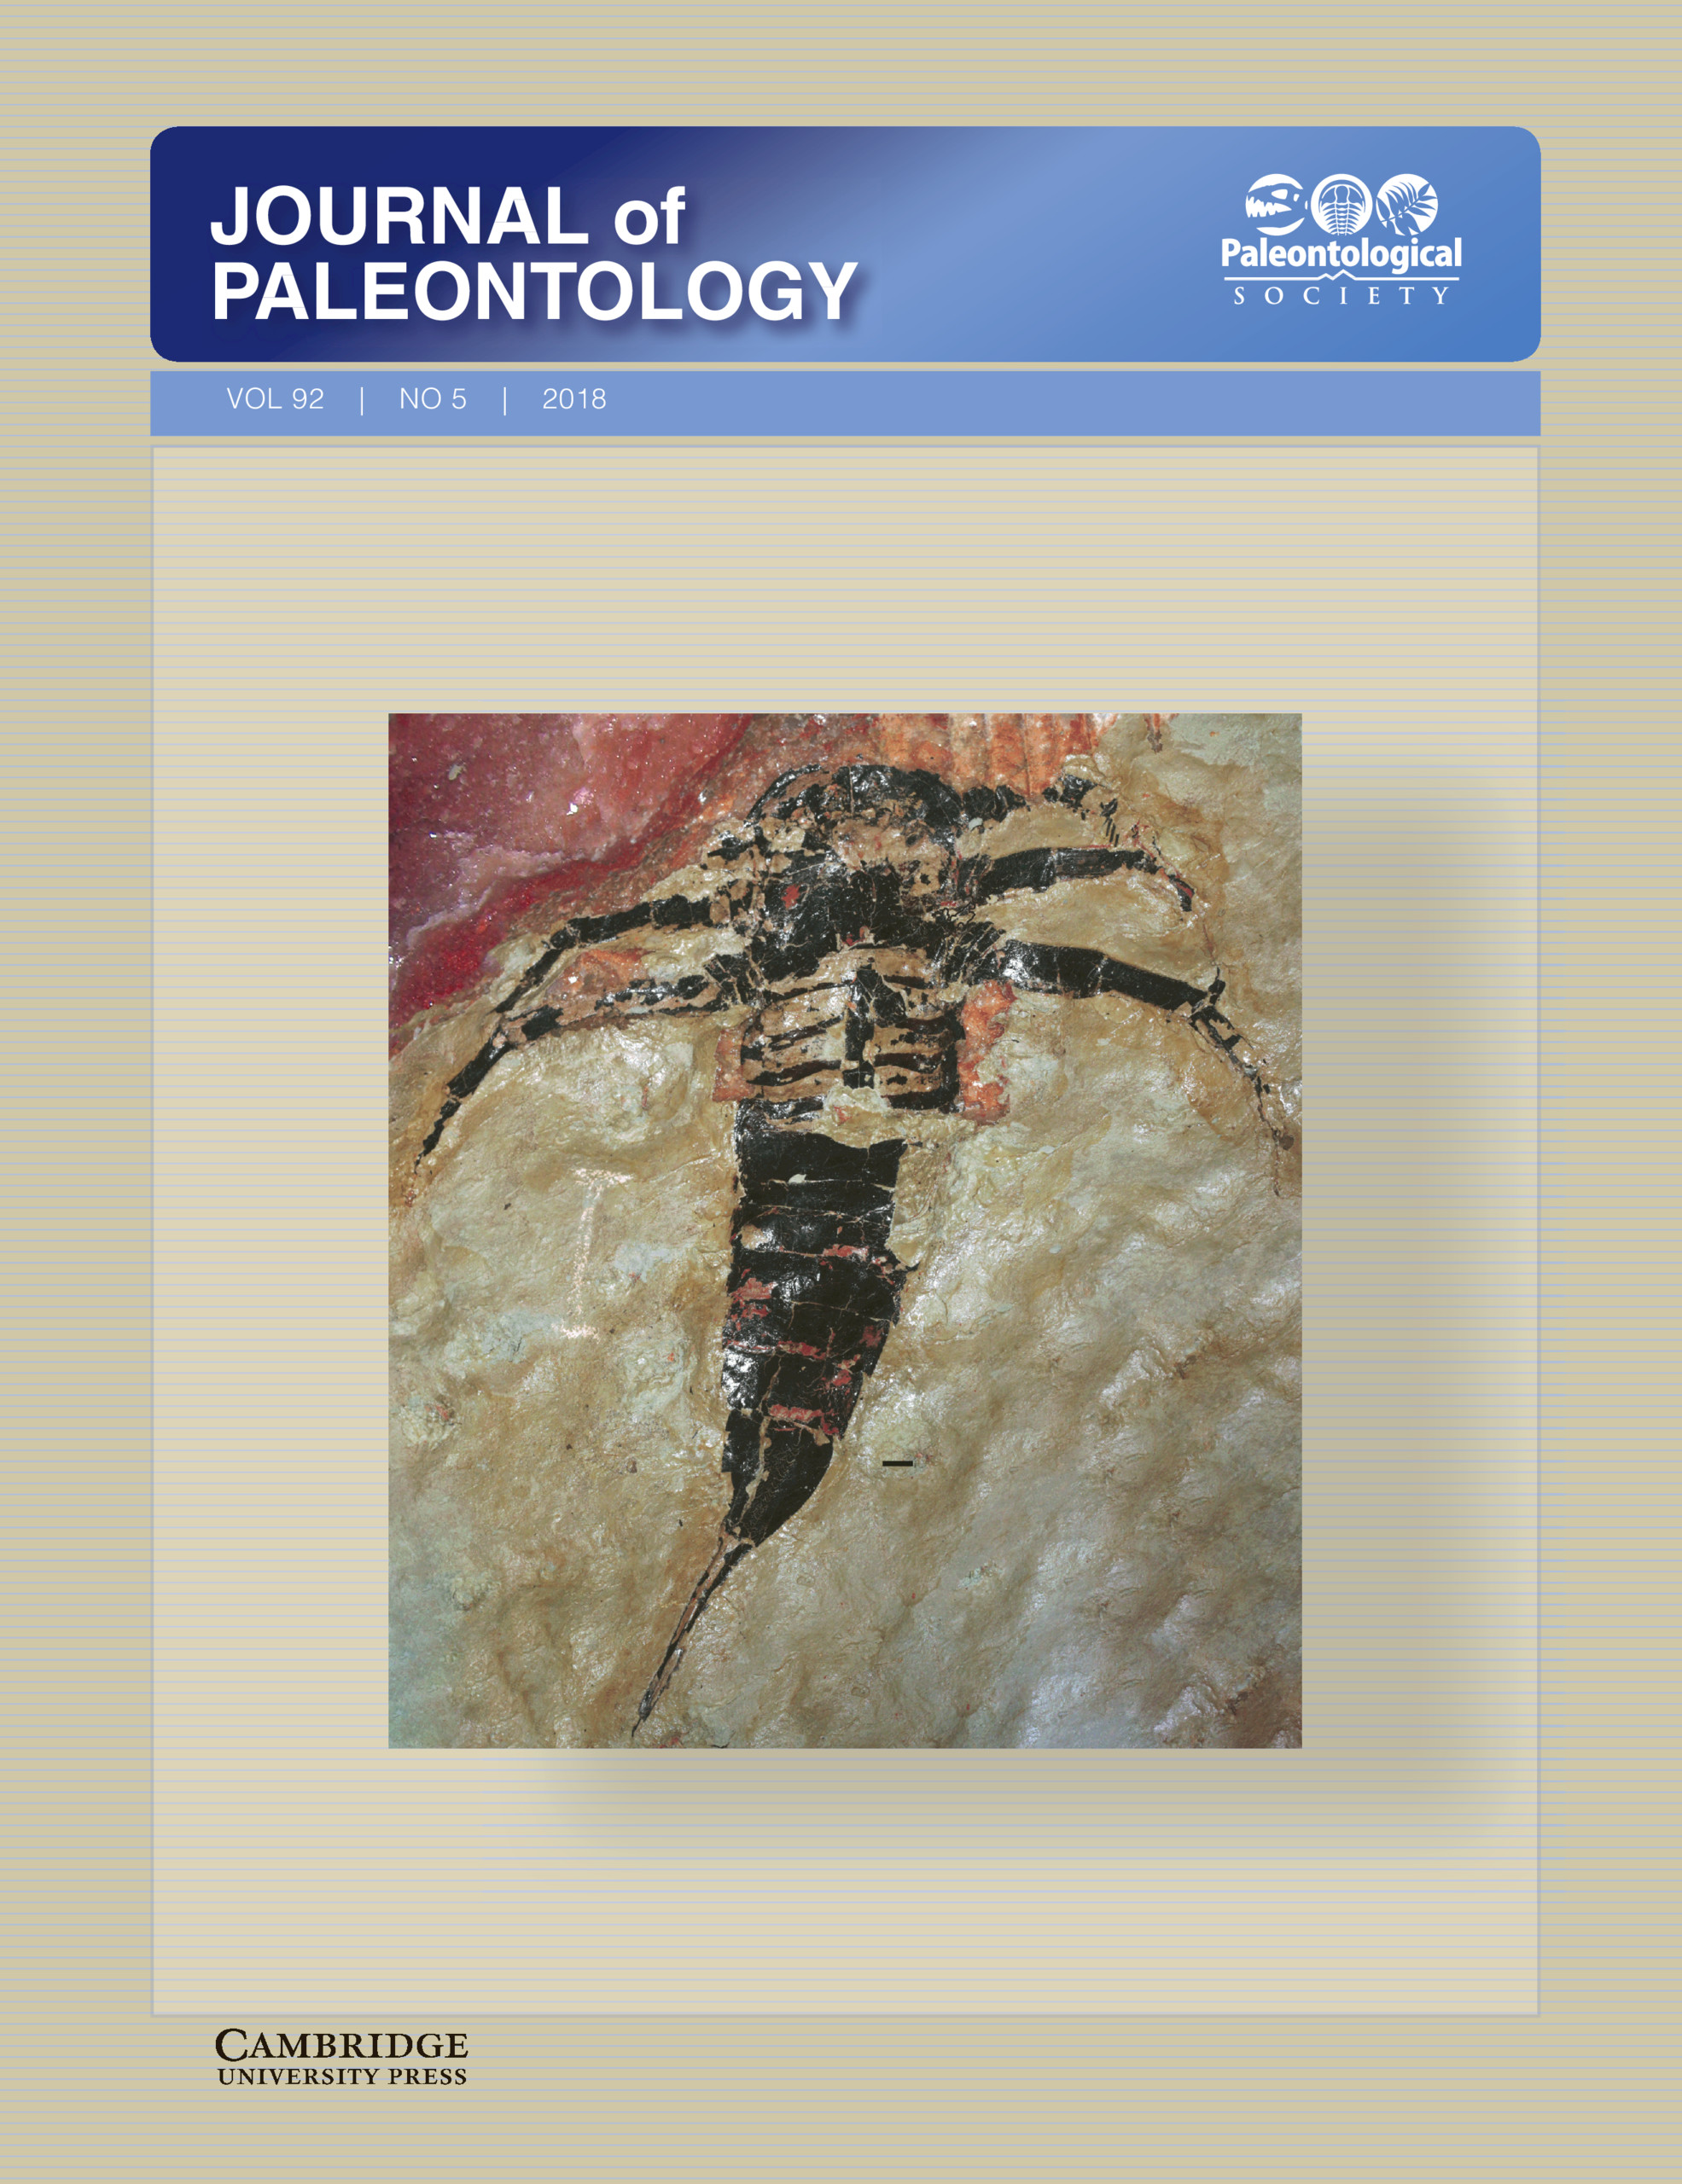   Soligorskopterus  on the cover of  Journal of Paleontology  